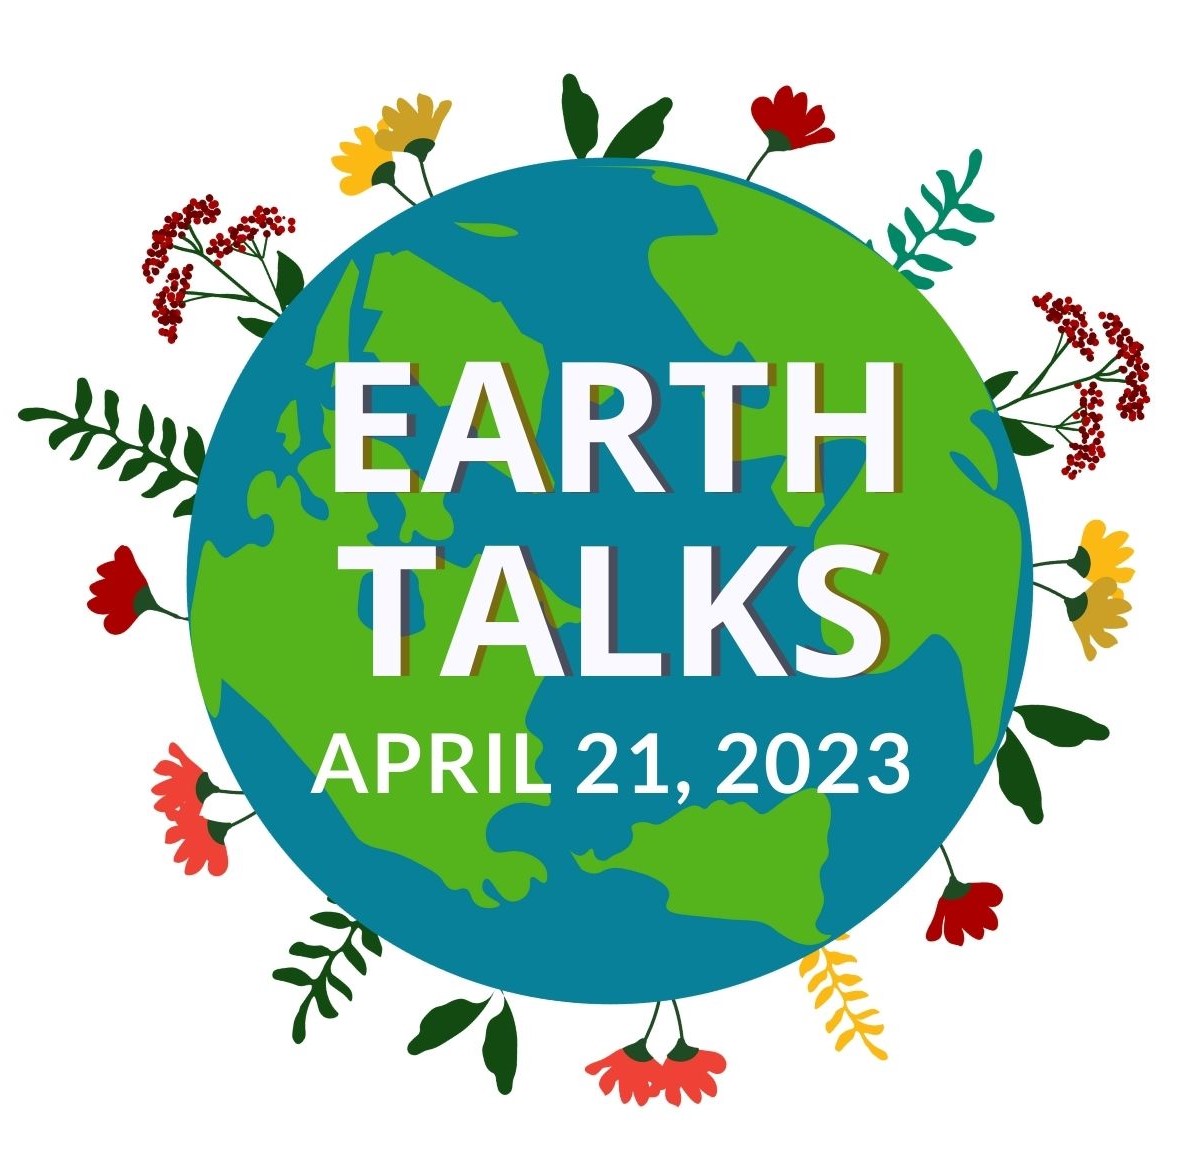 MISSED EARTH TALKS 2022? SEE RECORDED VIDEOS HERE.